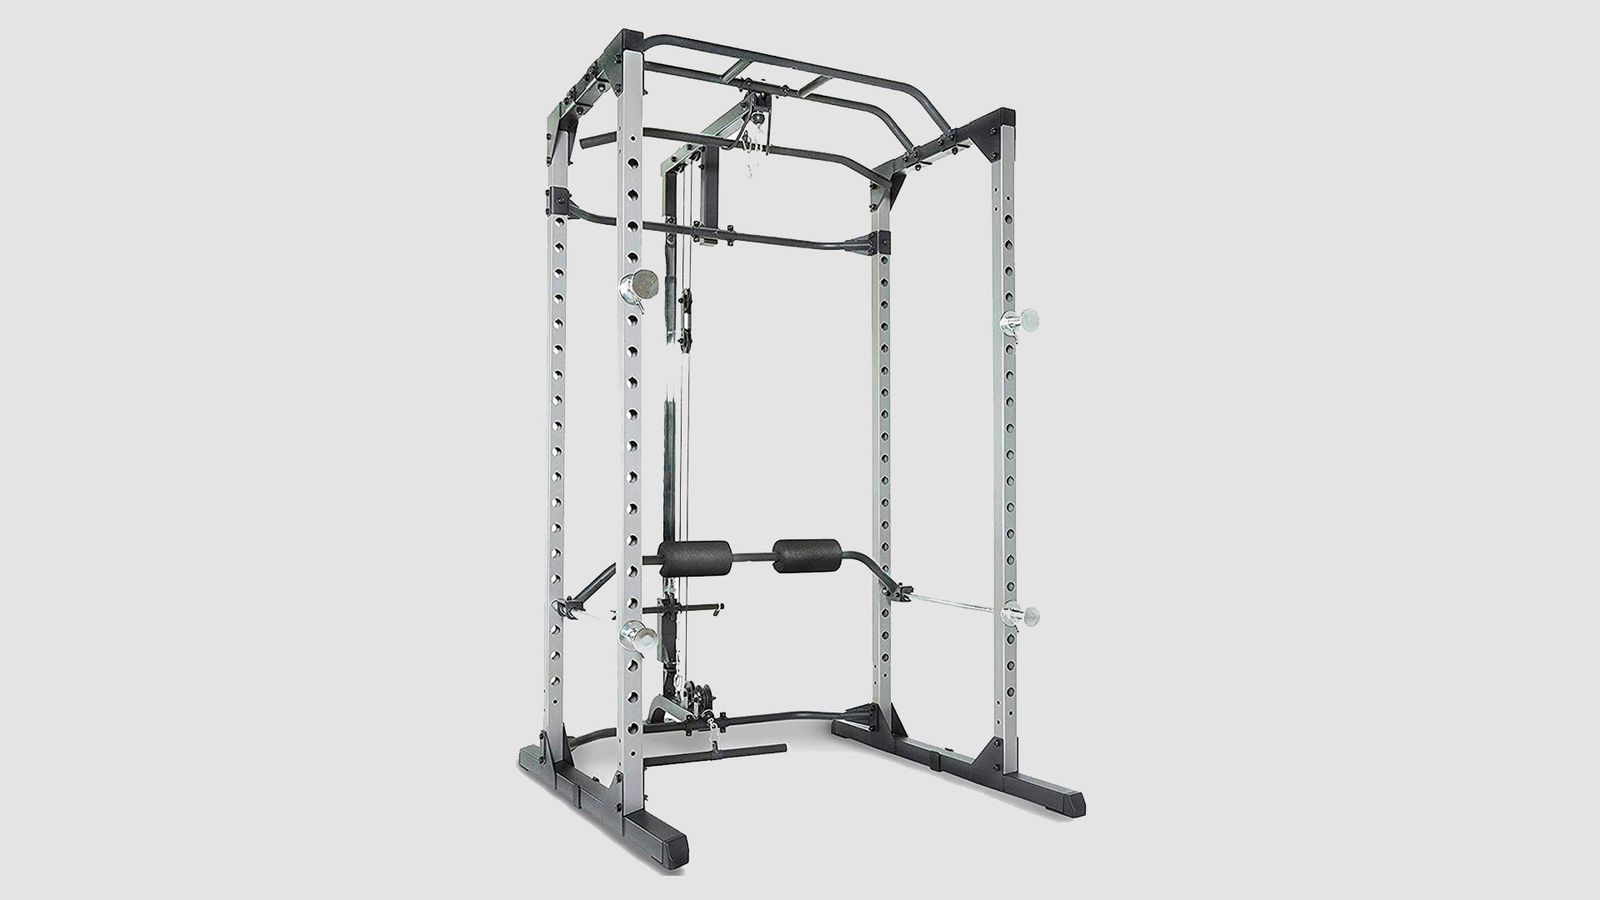 Fitness Reality 810XLT Super Max product image of a silver power cage with pull-up bars and a lat pulldown attachment